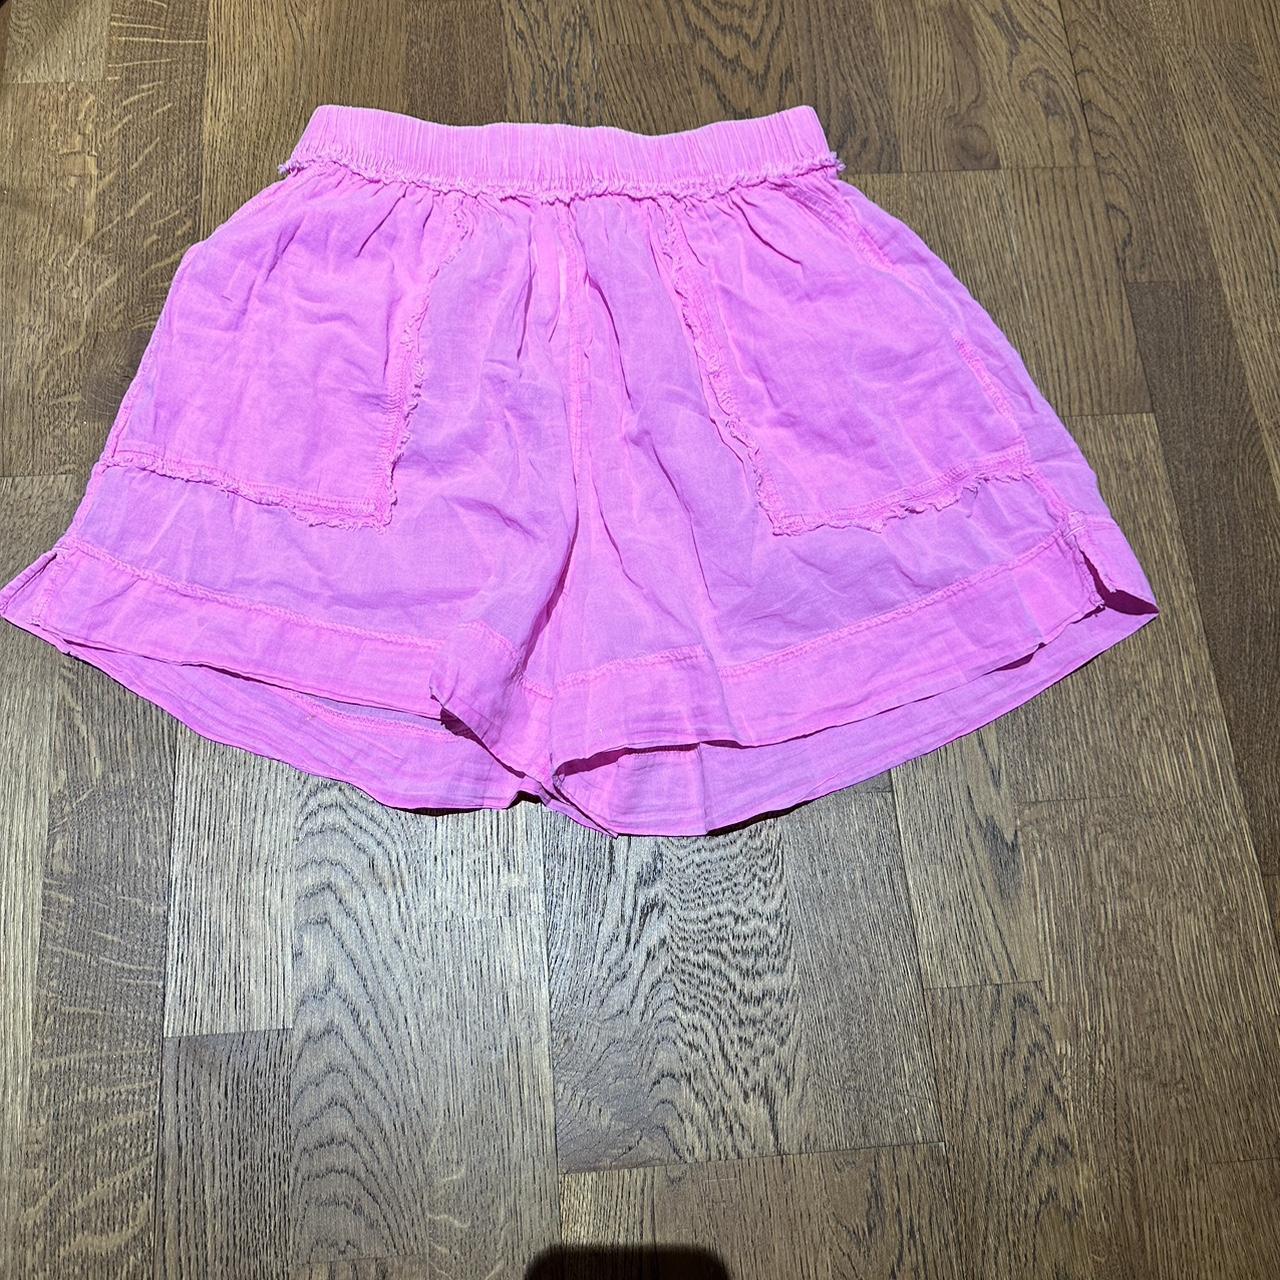 Free People boxer shorts. New with tags. - Depop